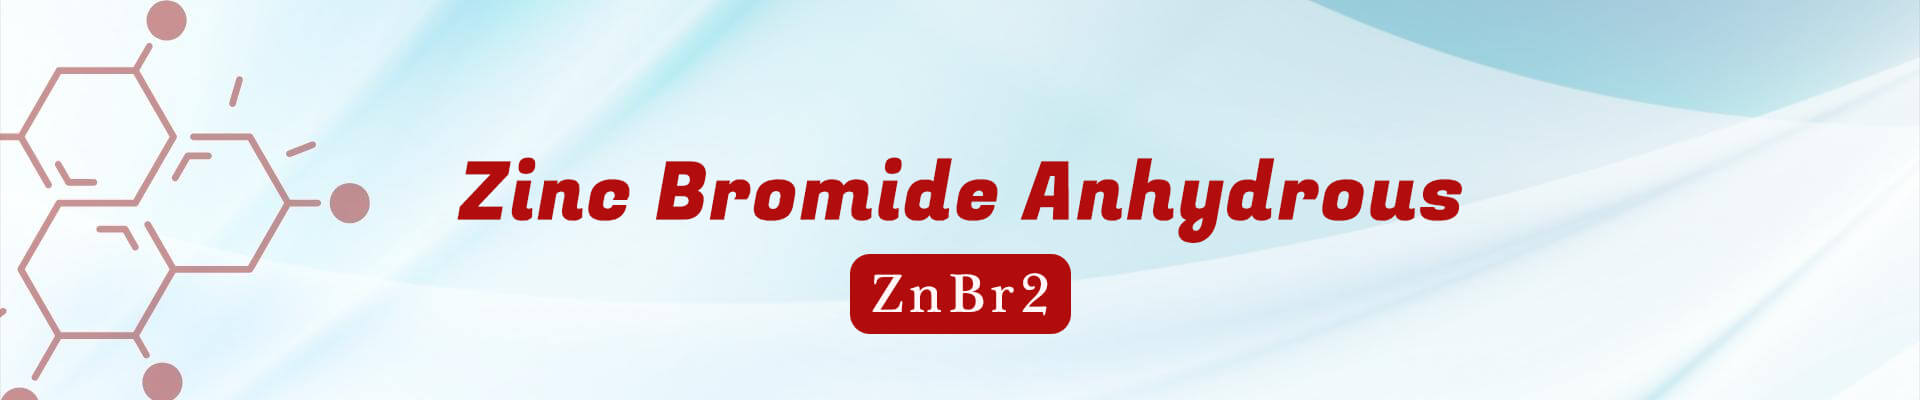 Zinc Bromide Anhydrous